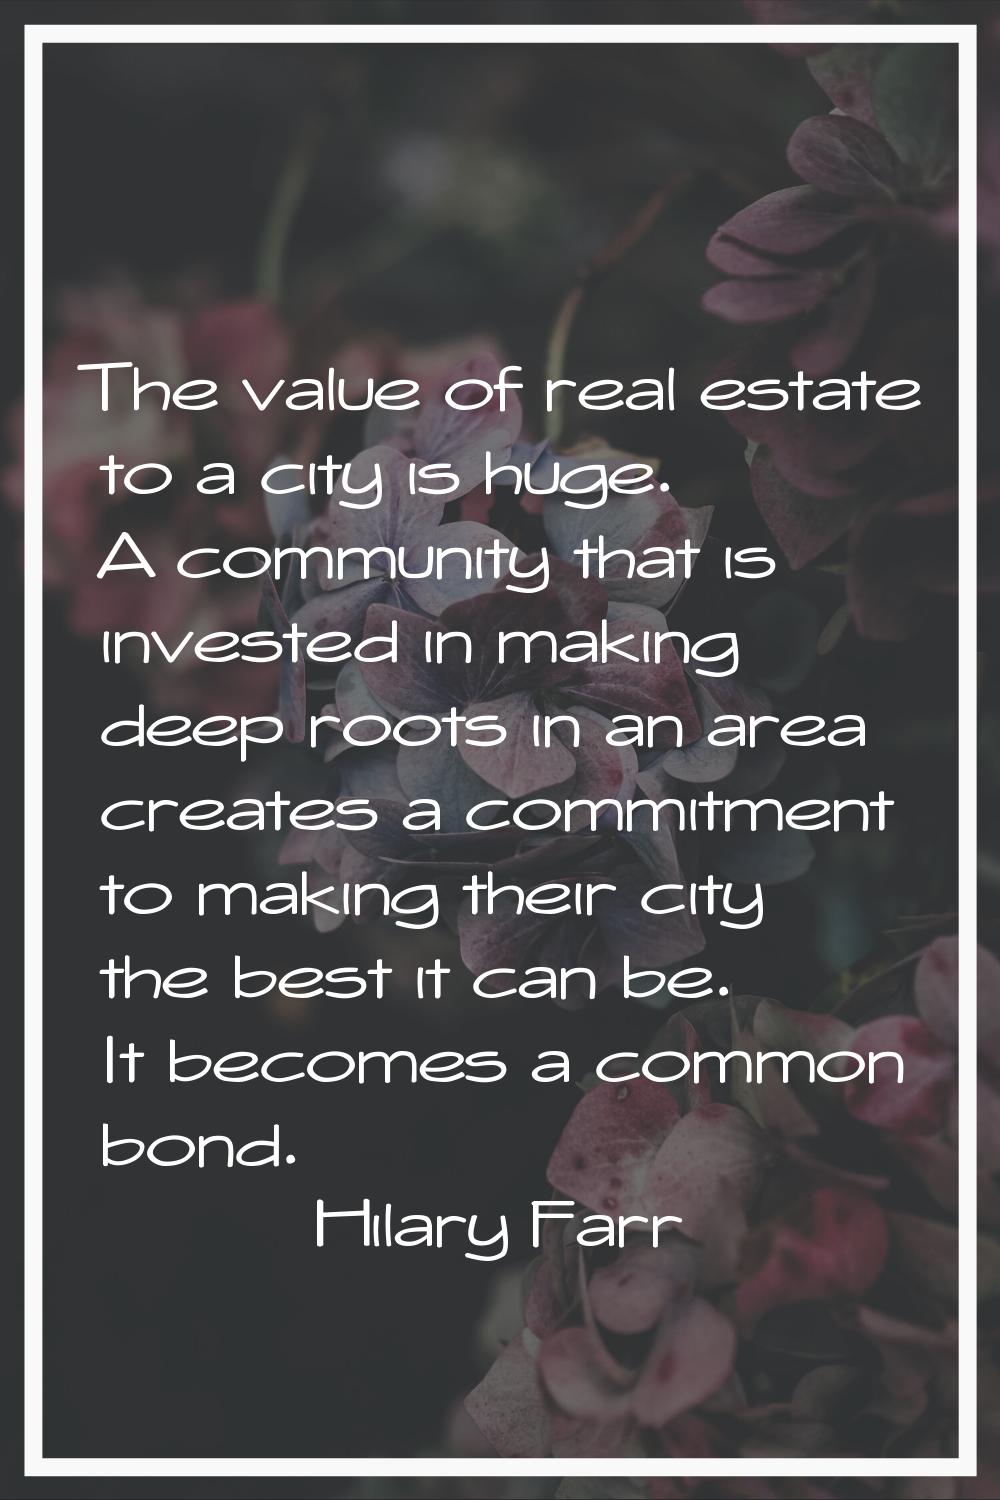 The value of real estate to a city is huge. A community that is invested in making deep roots in an